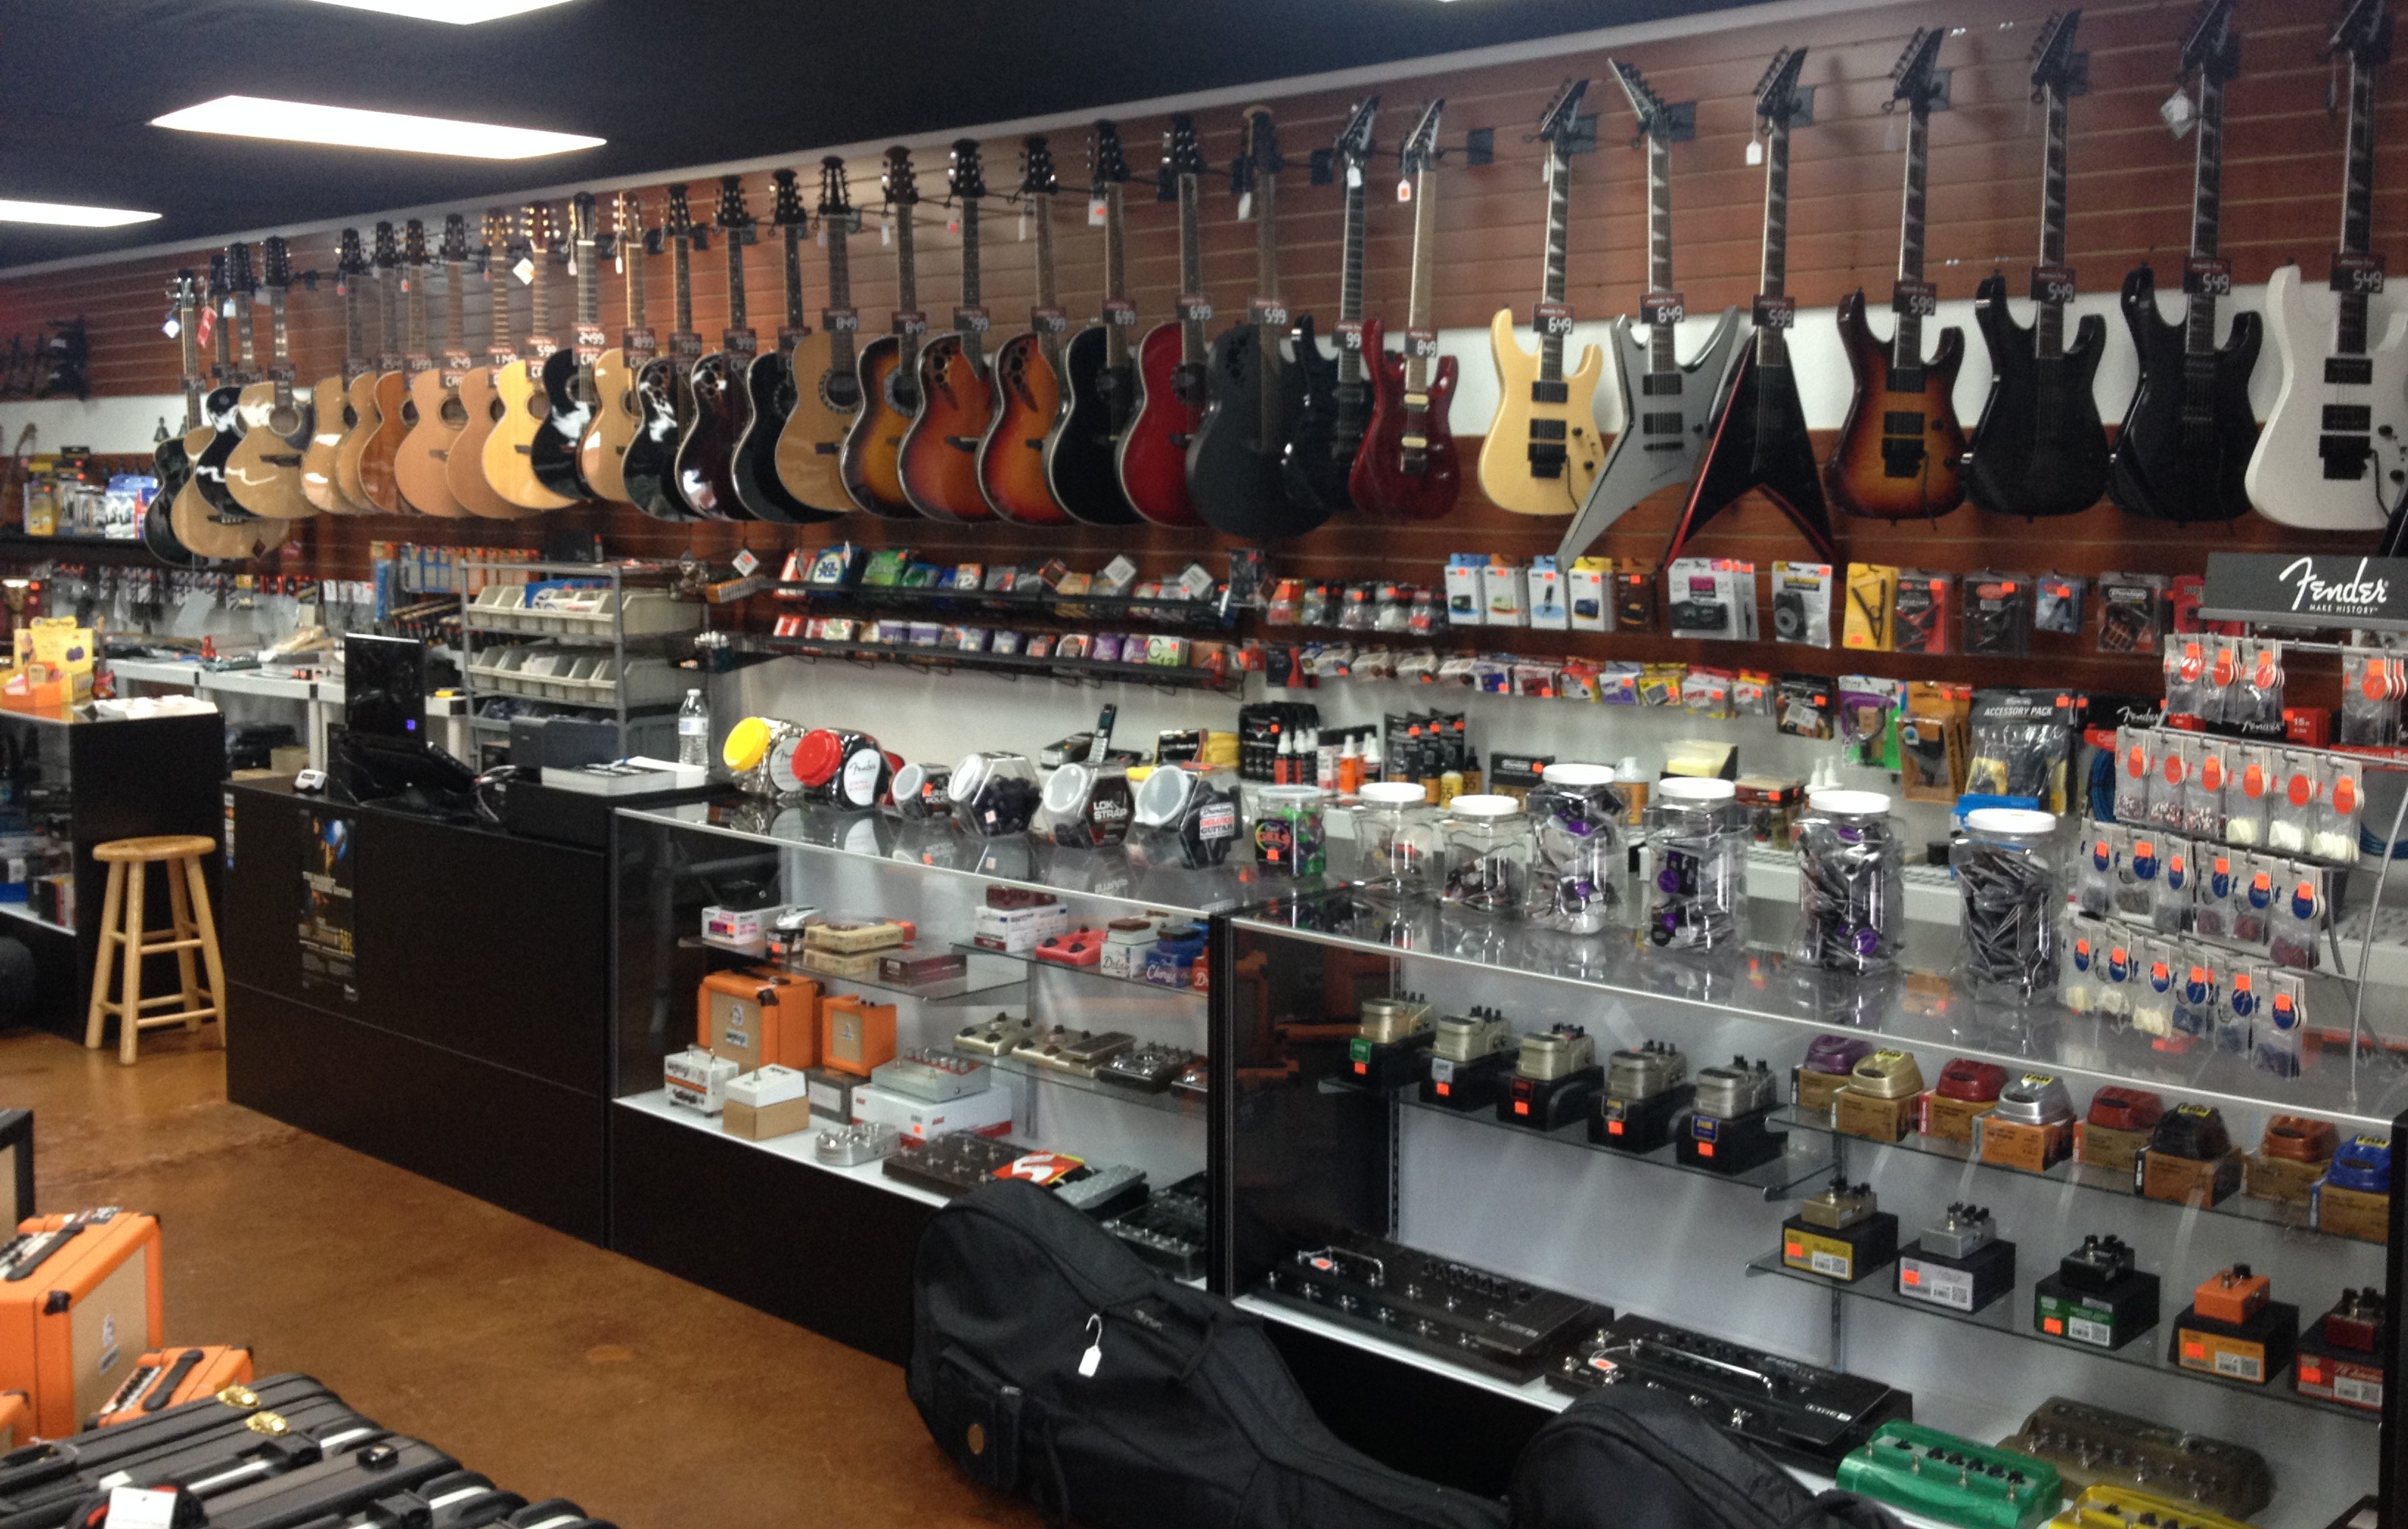 Music Fox: A Full Line Music Store in the Lake Travis Area - Lake